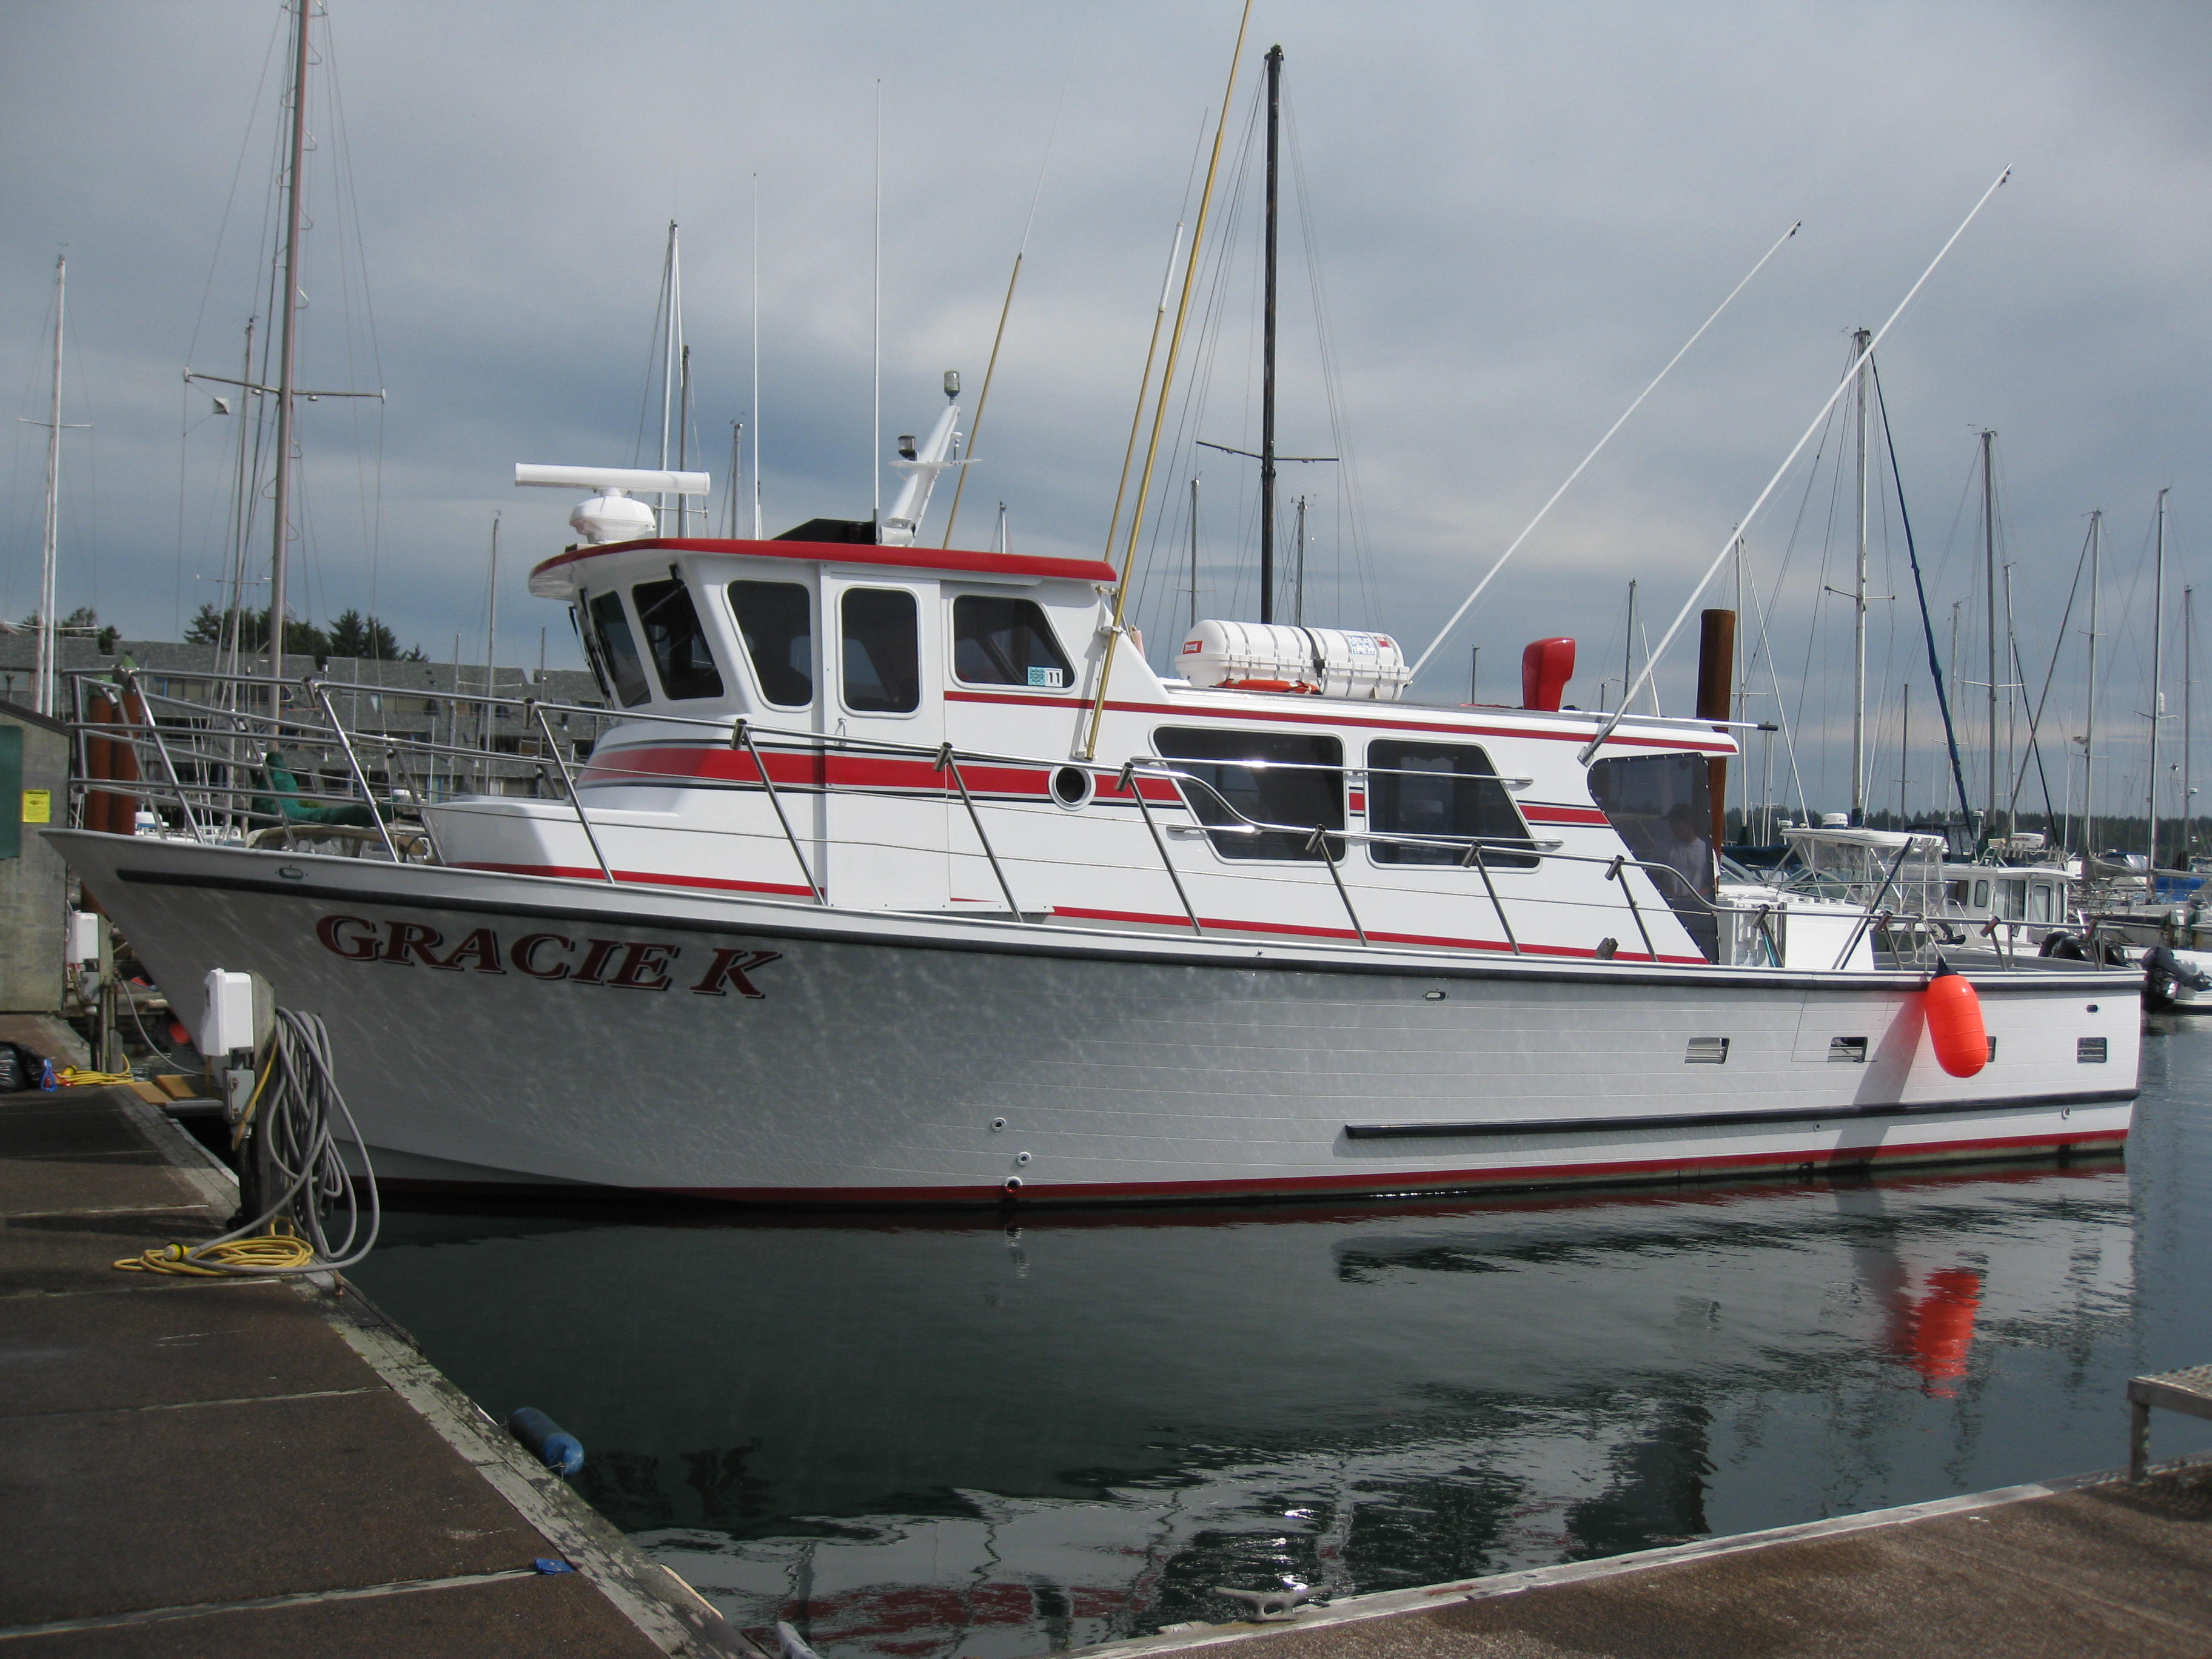 Have you seen our new boat yet? | Yaquina Bay Charters